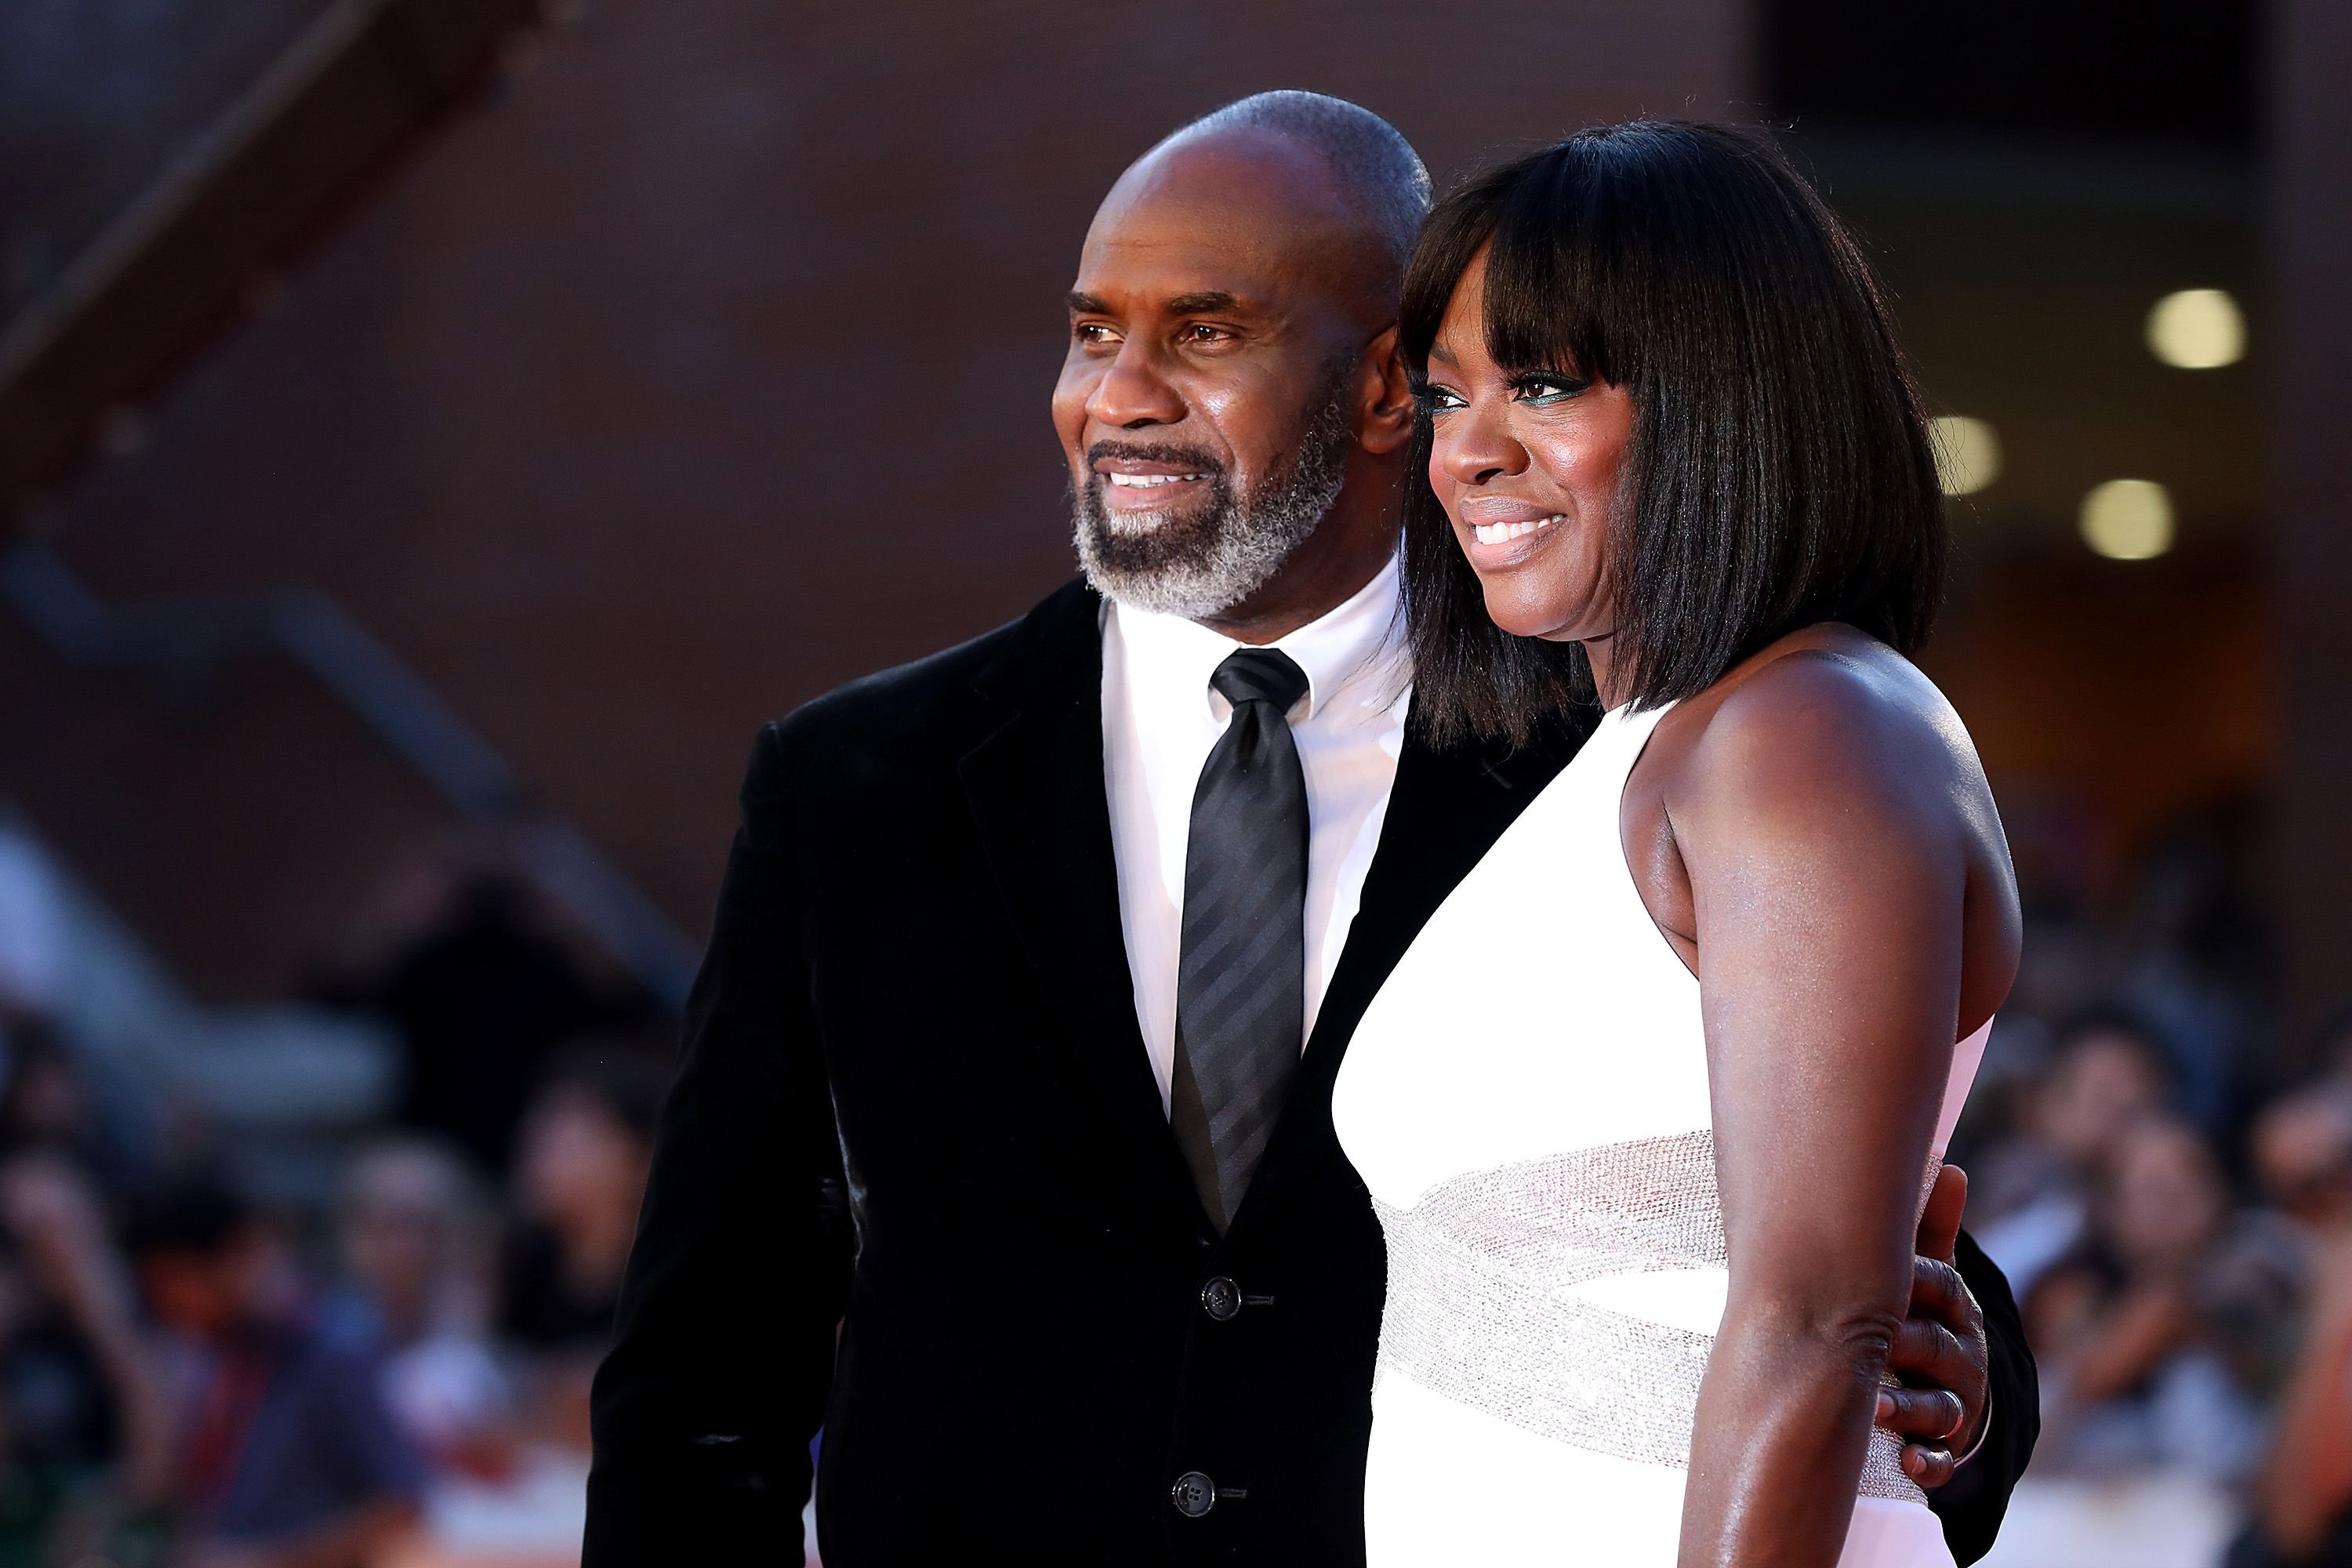 Julius Tennon and Viola Davis at the red carpet during the 14th Rome Film Festival on October 26, 2019 in Rome, Italy | Photo: Getty Images